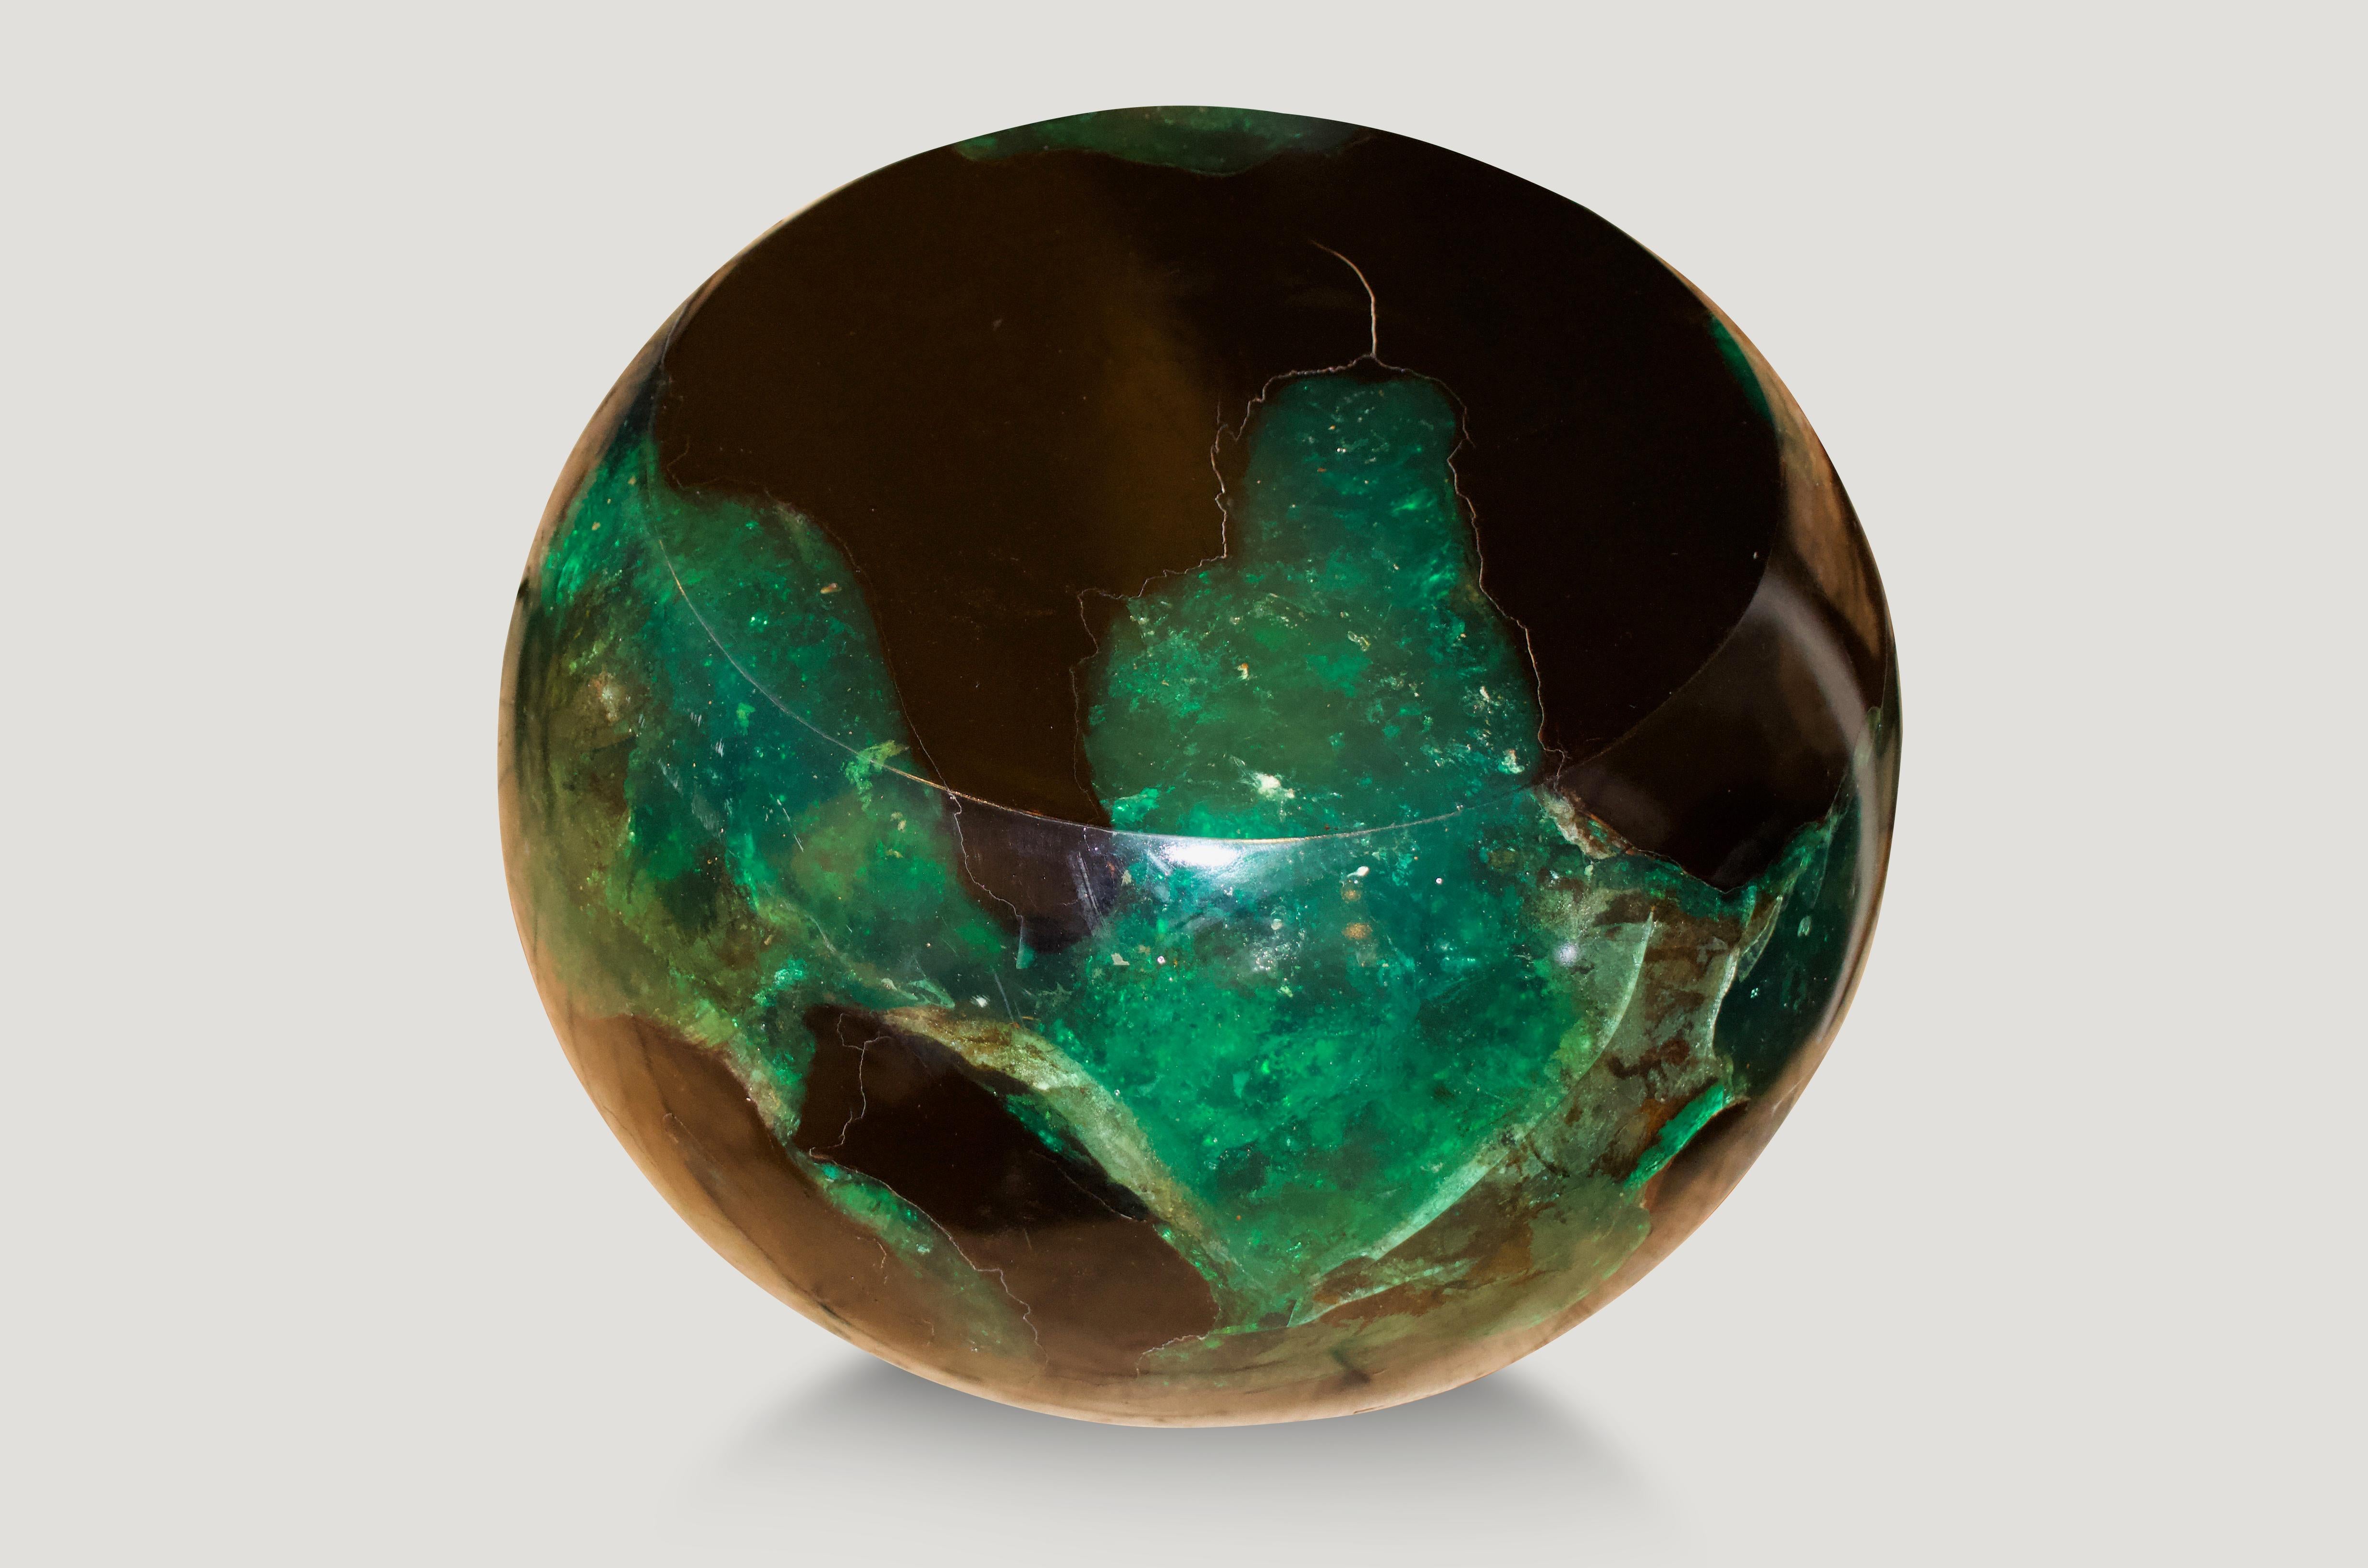 The cracked resin drum side table or stool is made from teak infused with emerald resin.

The Cracked Resin collection is a revolutionary line of modern coffee tables, side tables and dining tables made from organic teak and resin. The natural